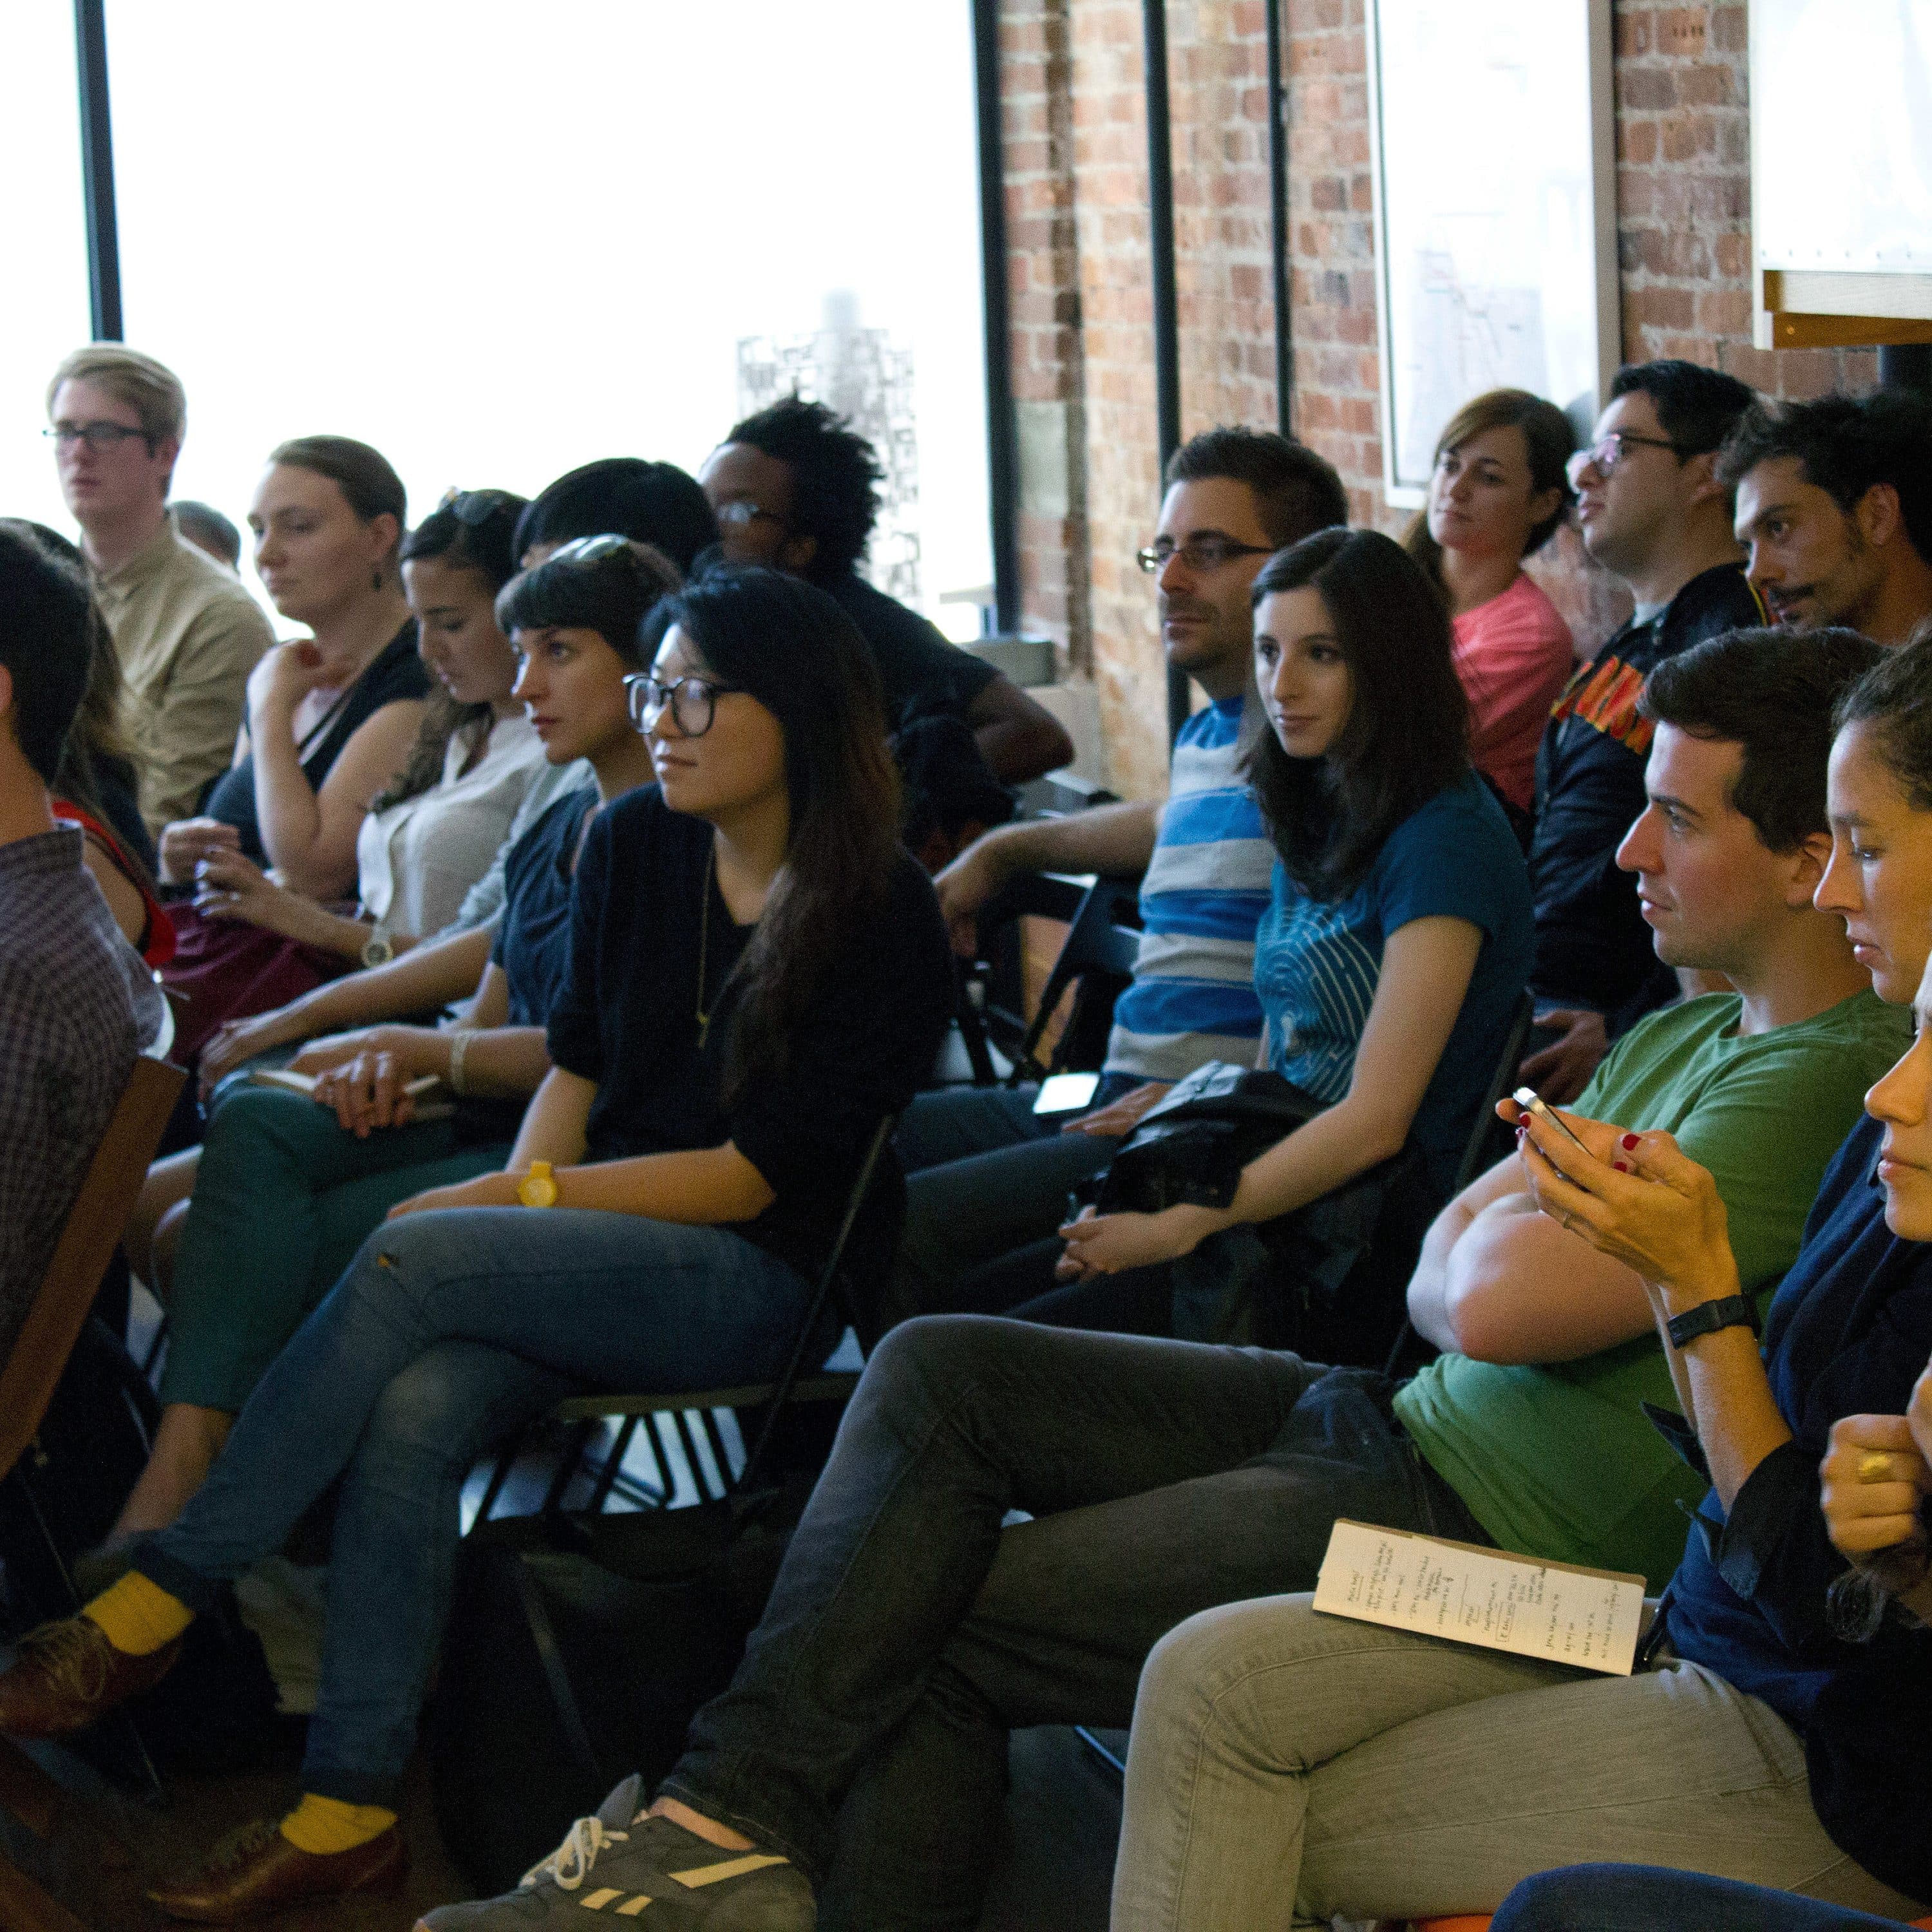 A diverse group of people is seated in a room, attentively listening to a presentation. Some are taking notes or using their phones. The room has large windows and exposed brick walls, creating a casual atmosphere.